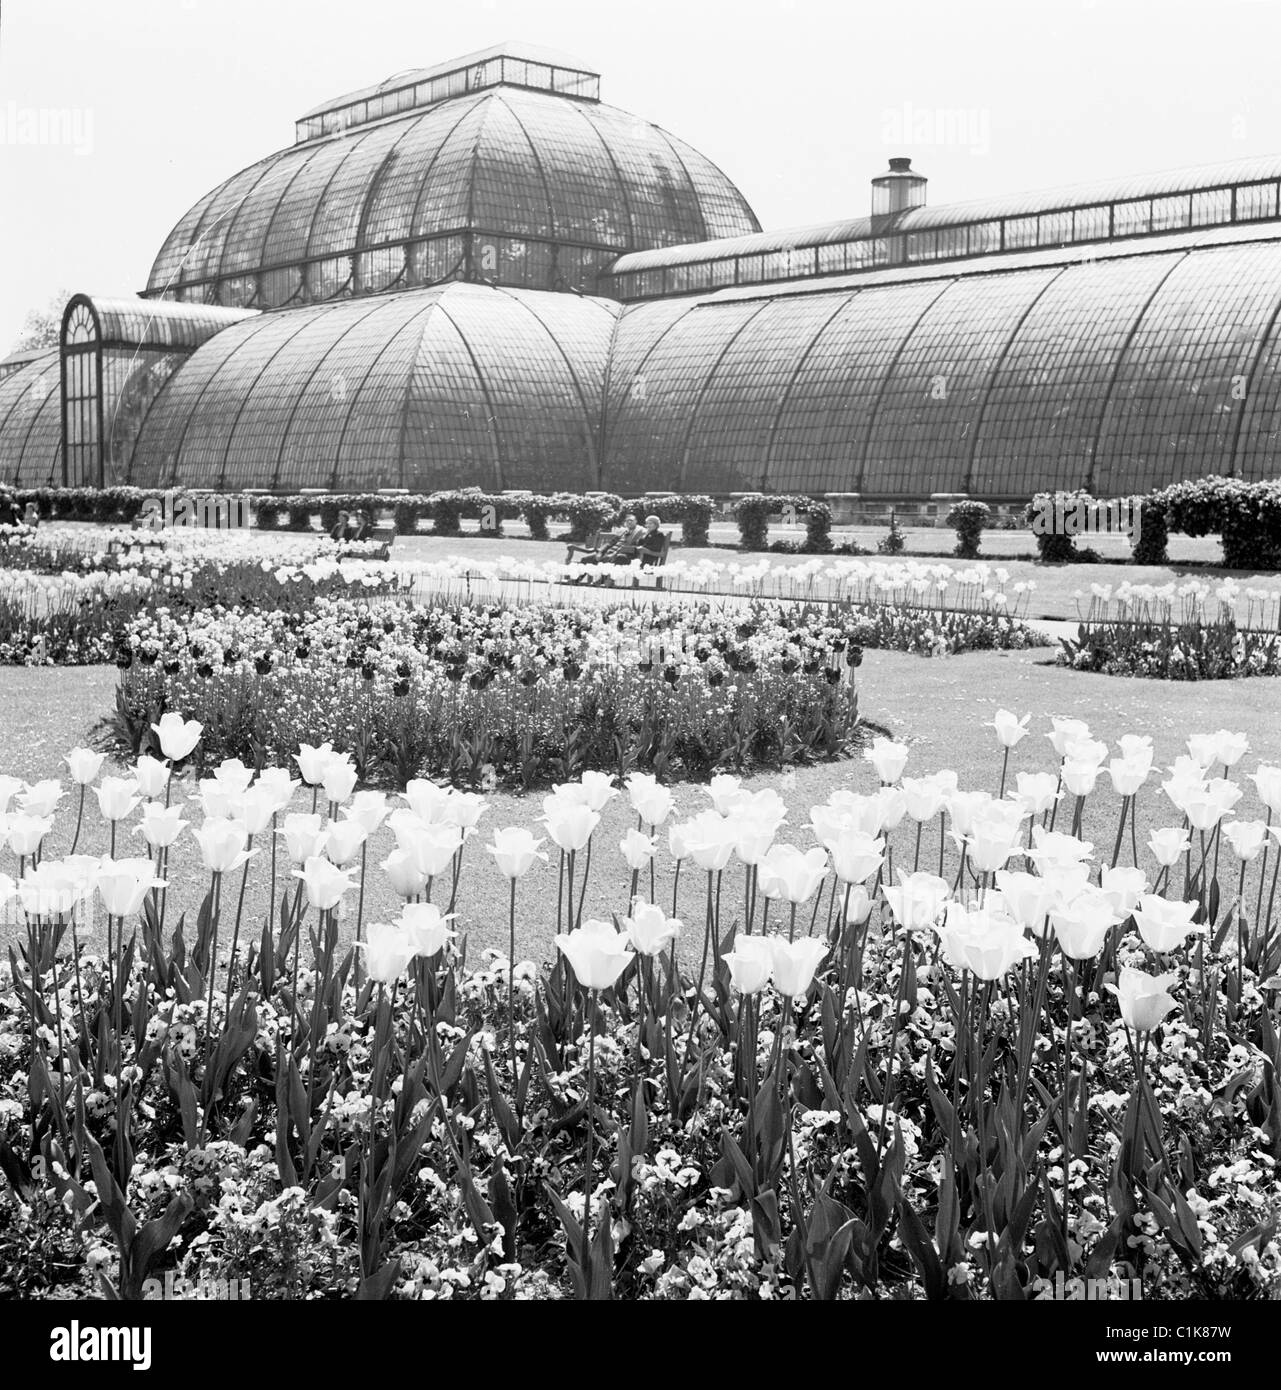 1950s, victorian glasshouse, the Palm house at the Royal Botanic Gardens at Kew, Richmond upon Thames, built in 1844 and designed by Decimus Burton. Stock Photo